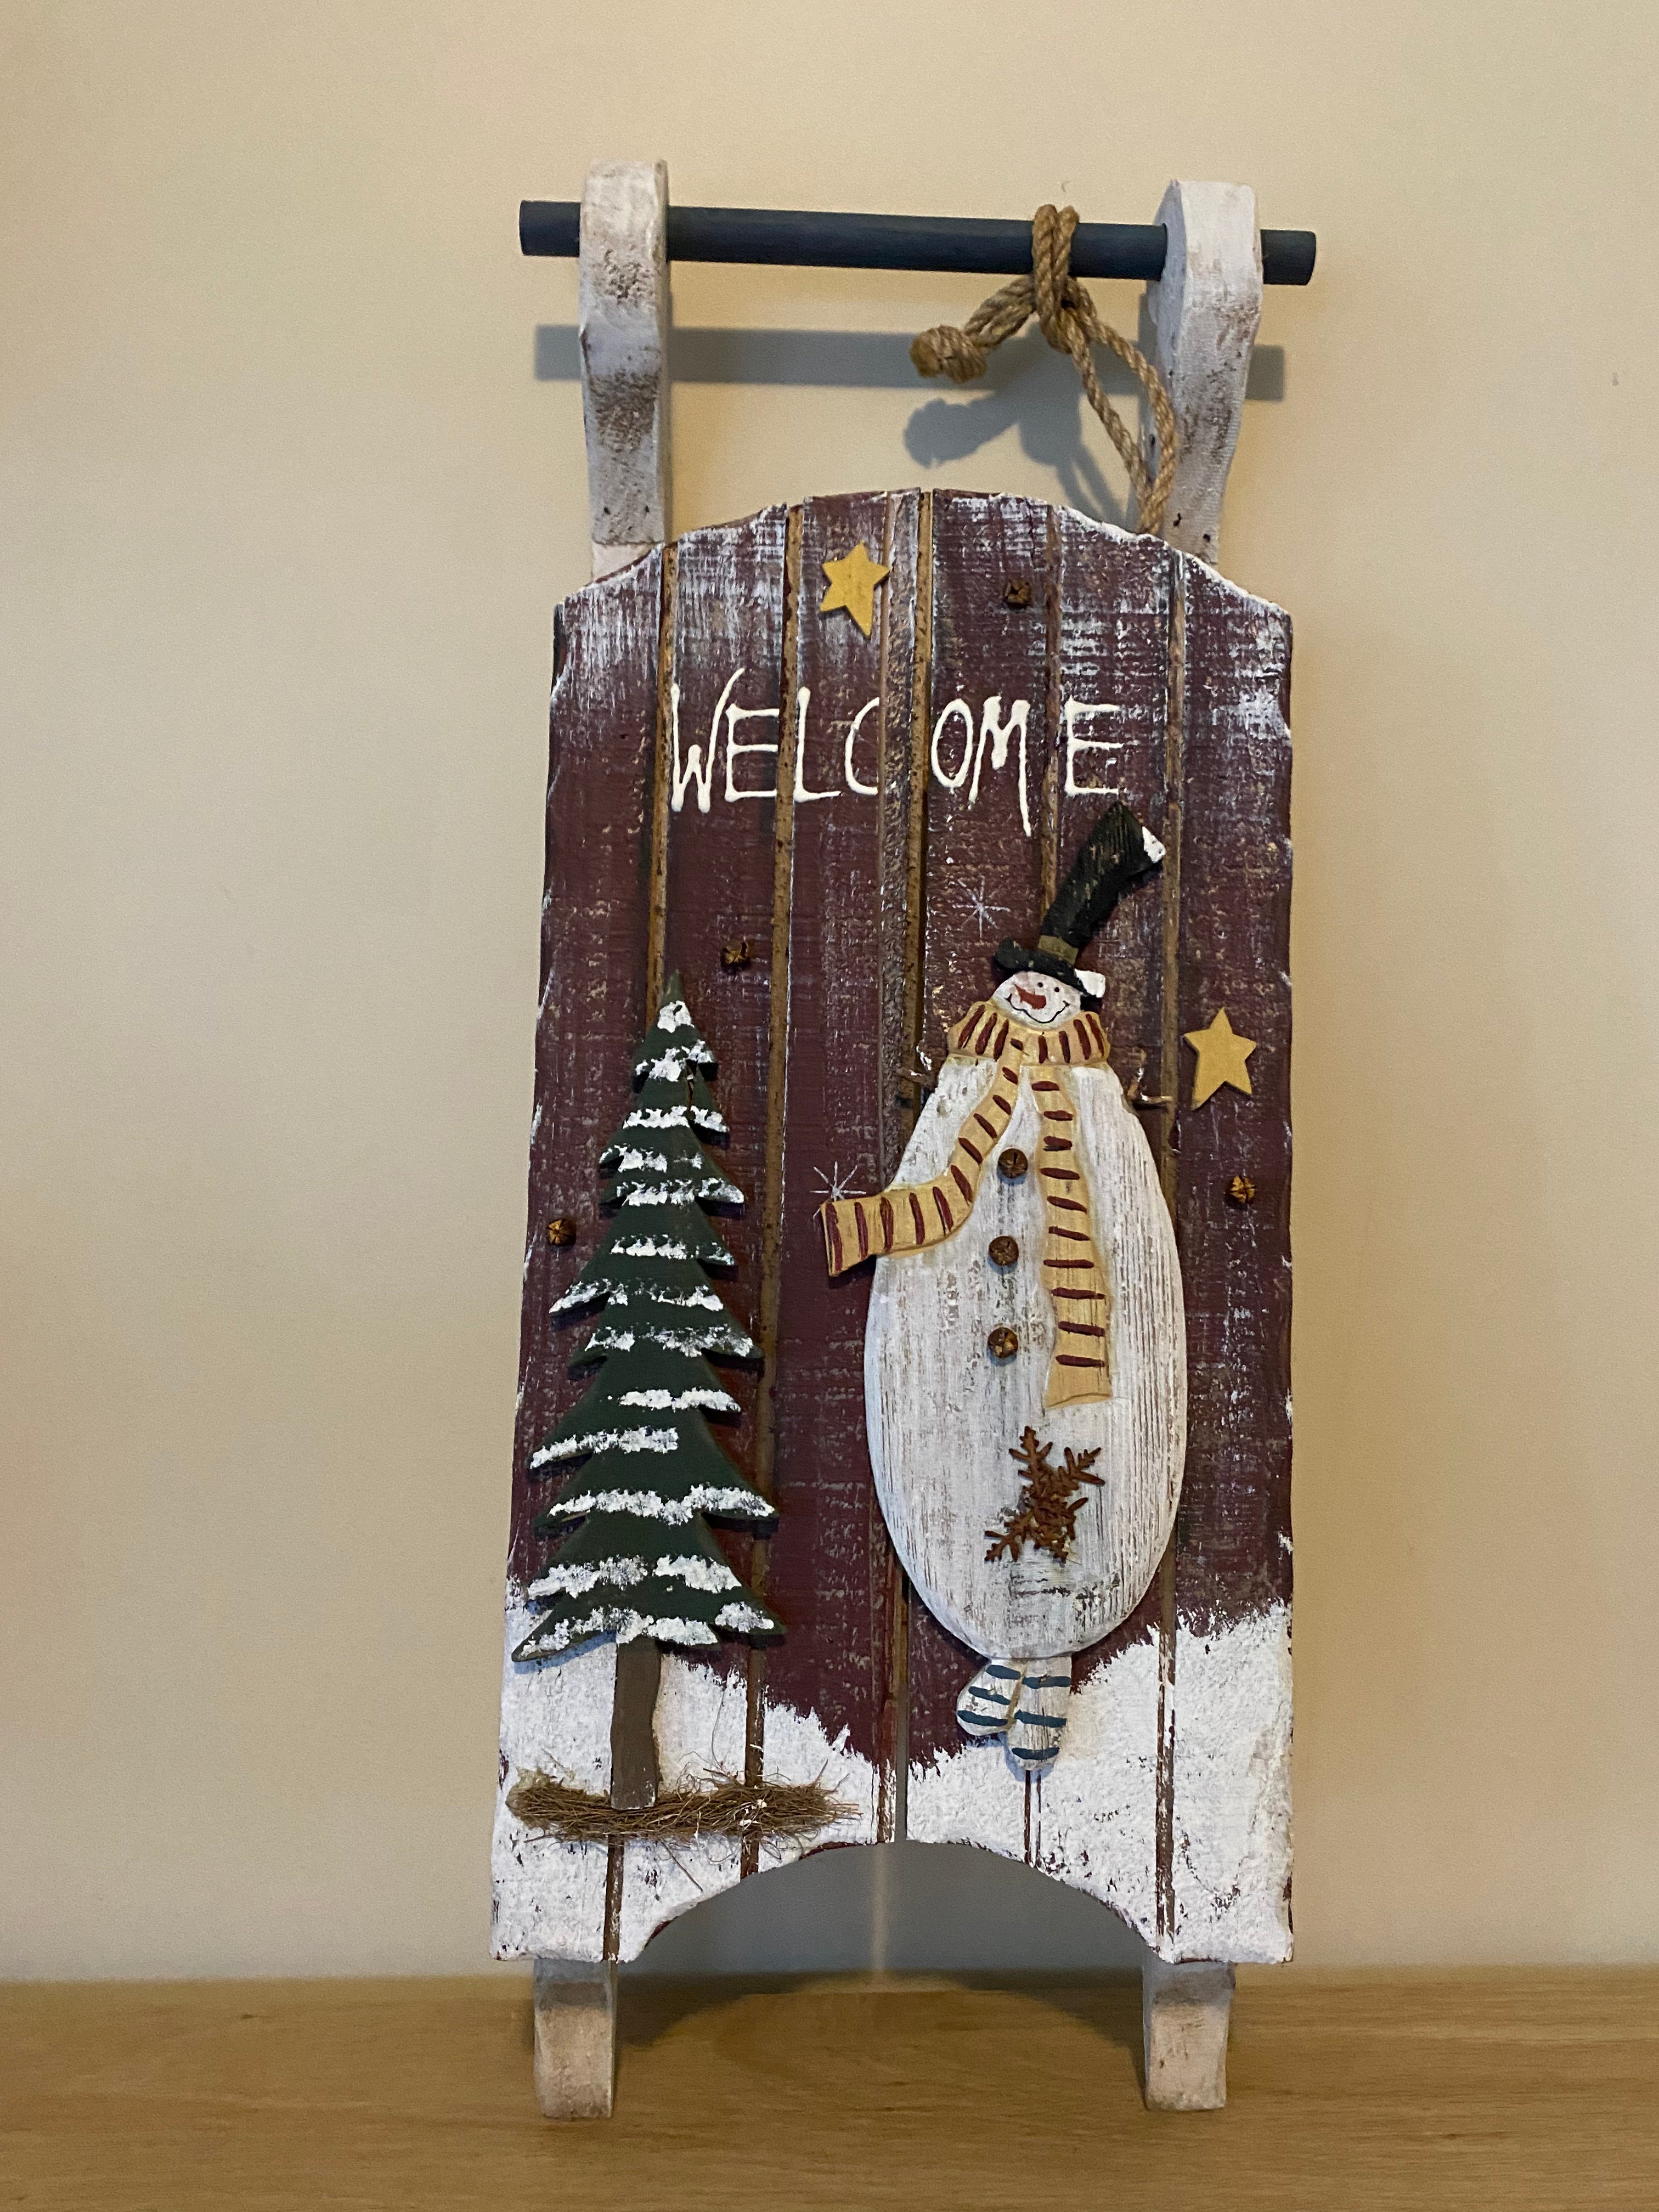 wooden decorative welcome sign in the shape of a vintage sled, decorated with a snowman and a snow-covered pine tree. Resting against a beige wall, on a wooden table. front view